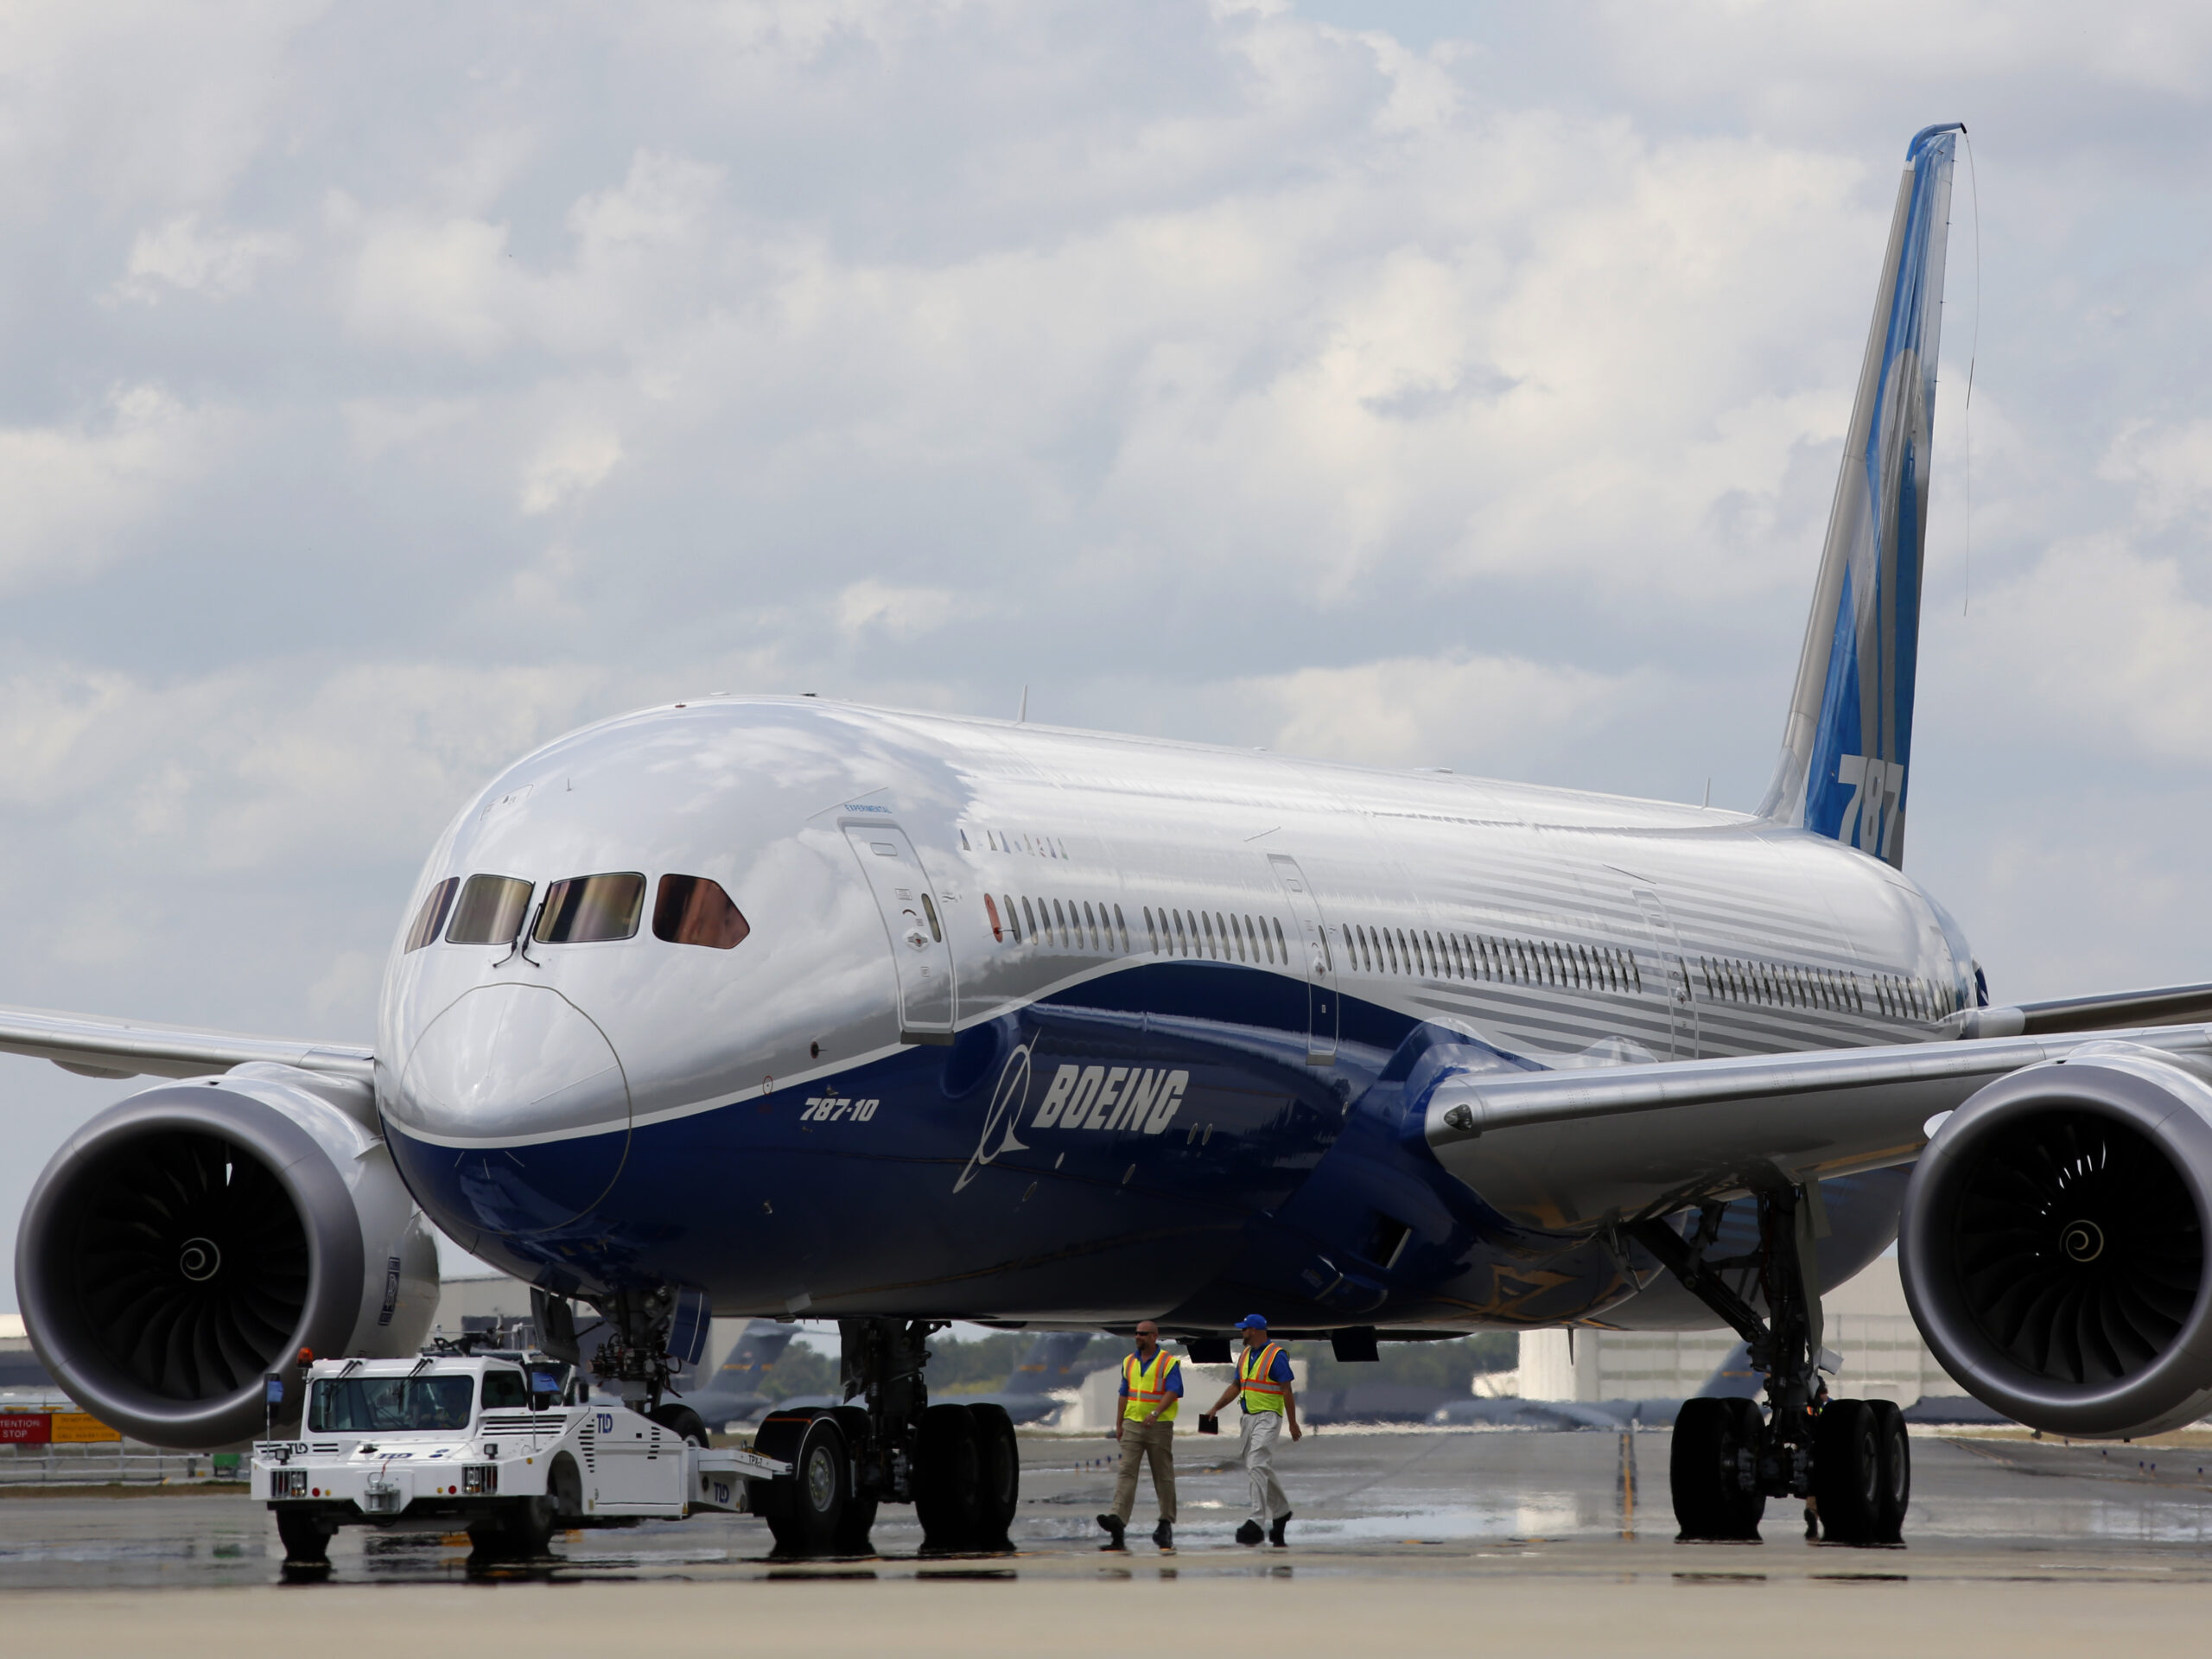 Boeing employees walk the new Boeing 787-10 Dreamliner down towards the delivery ramp area at the company's facility after conducting its first test flight at Charleston International Airport in 2017. A Senate subcommittee has opened an investigation into the safety of Boeing jetliners, intensifying safety concerns about the company's aircraft.